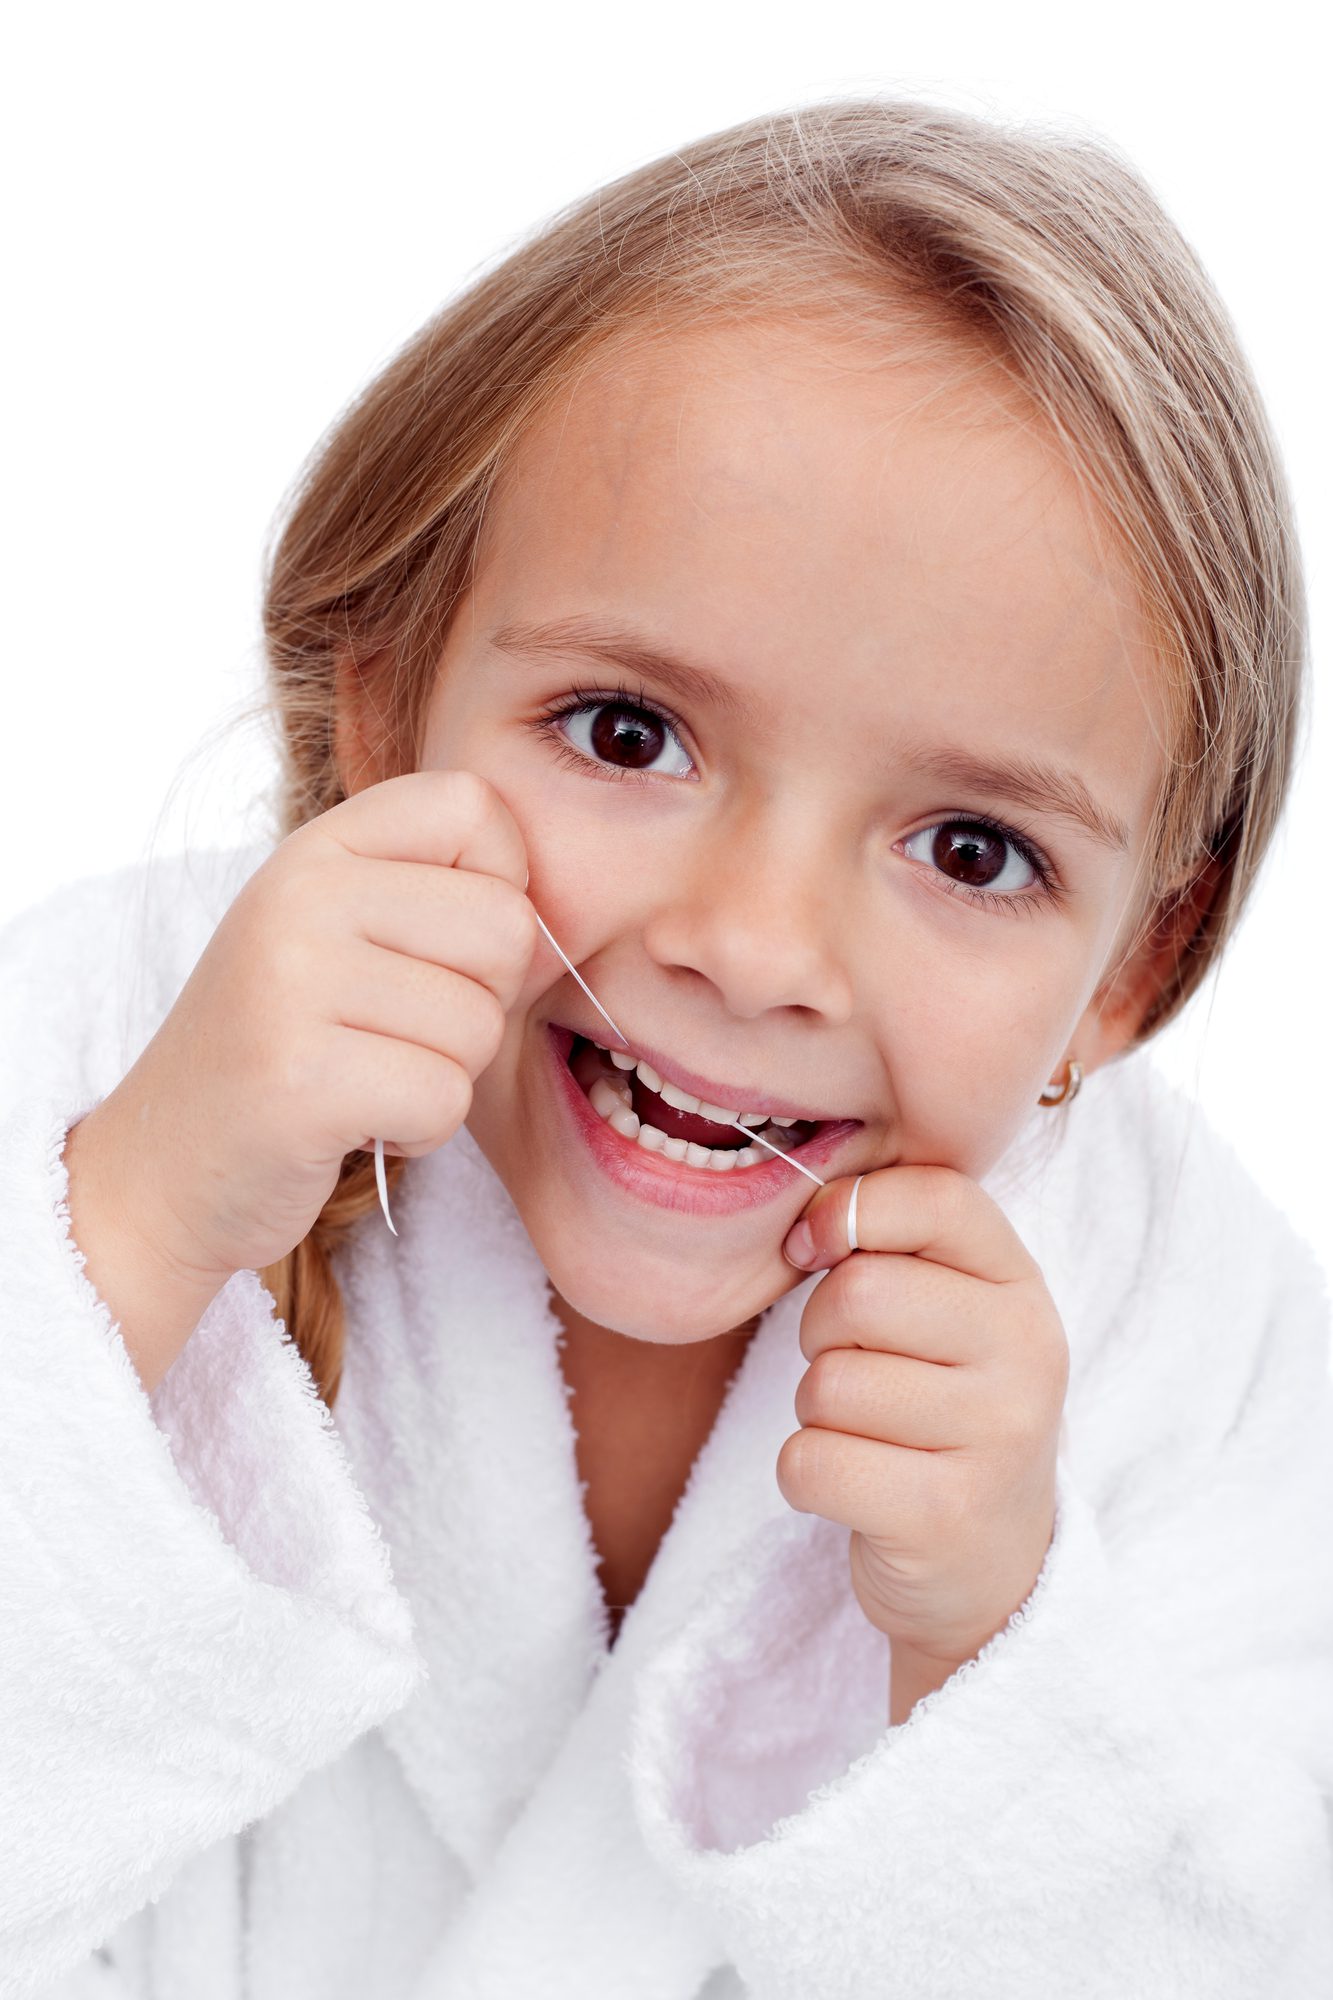 November 26th is National Flossing Day